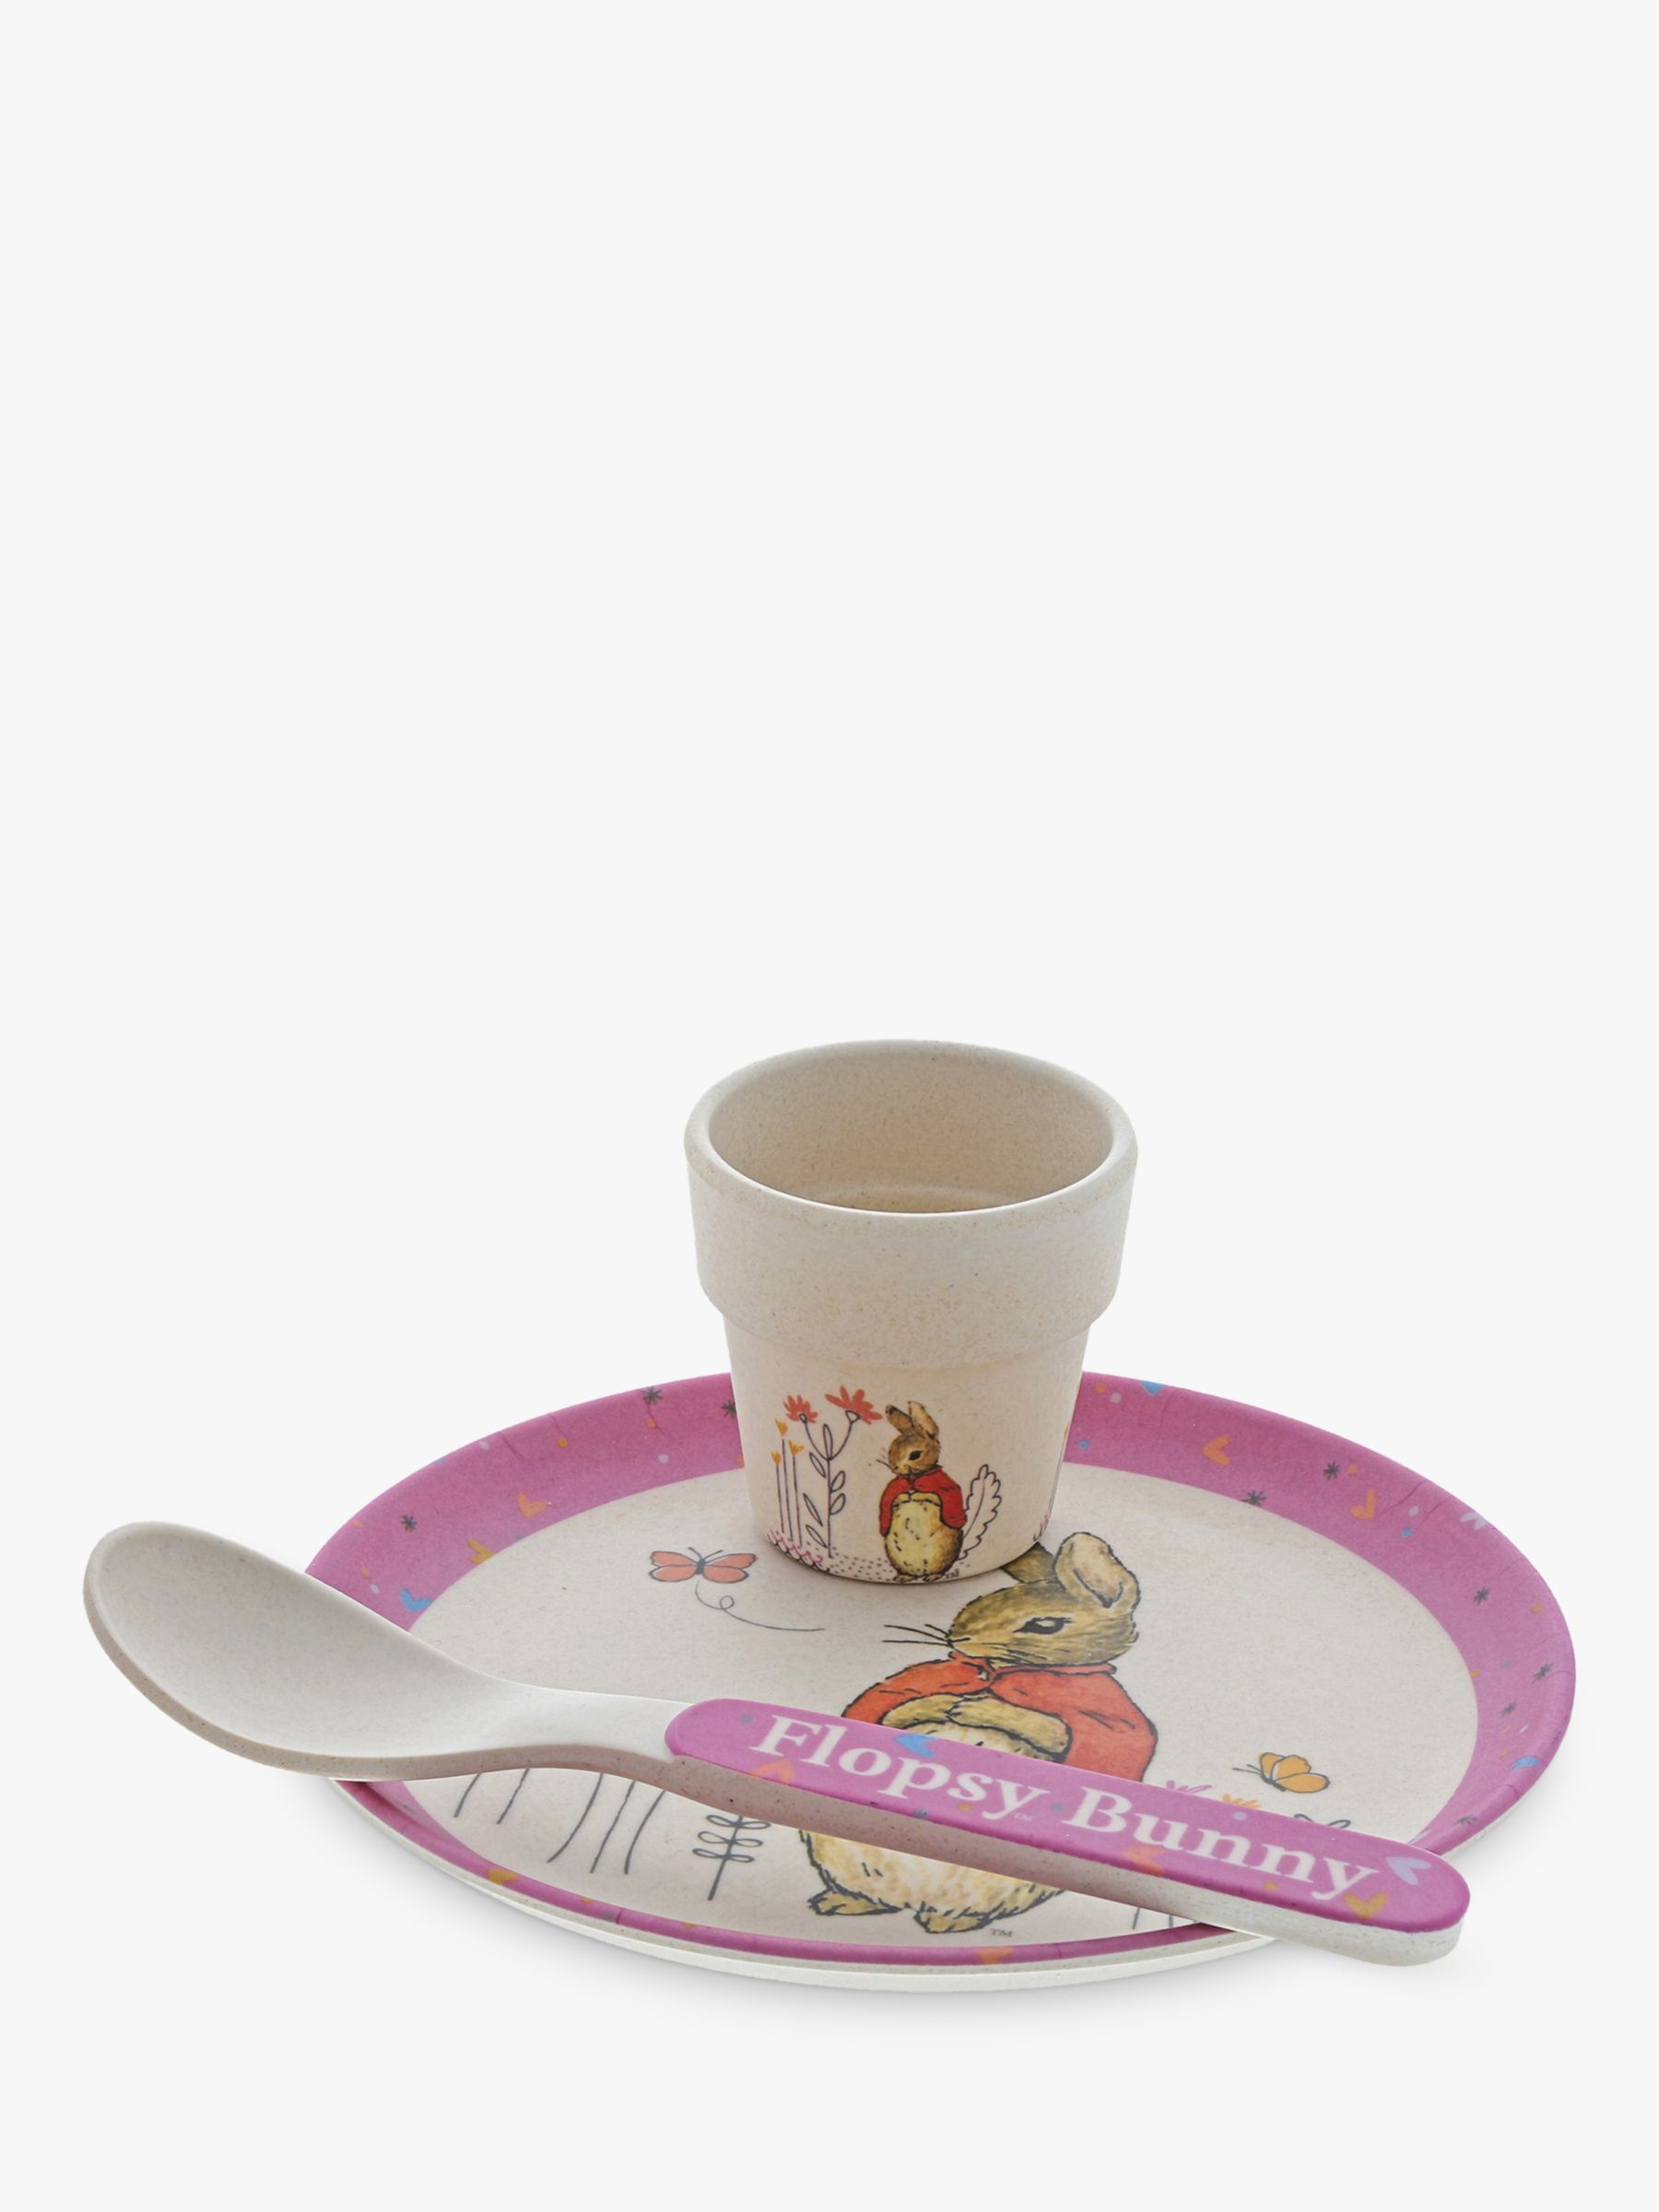 Image of Peter Rabbit Flopsy Bunny Eggcup Plate and Spoon Bamboo Set